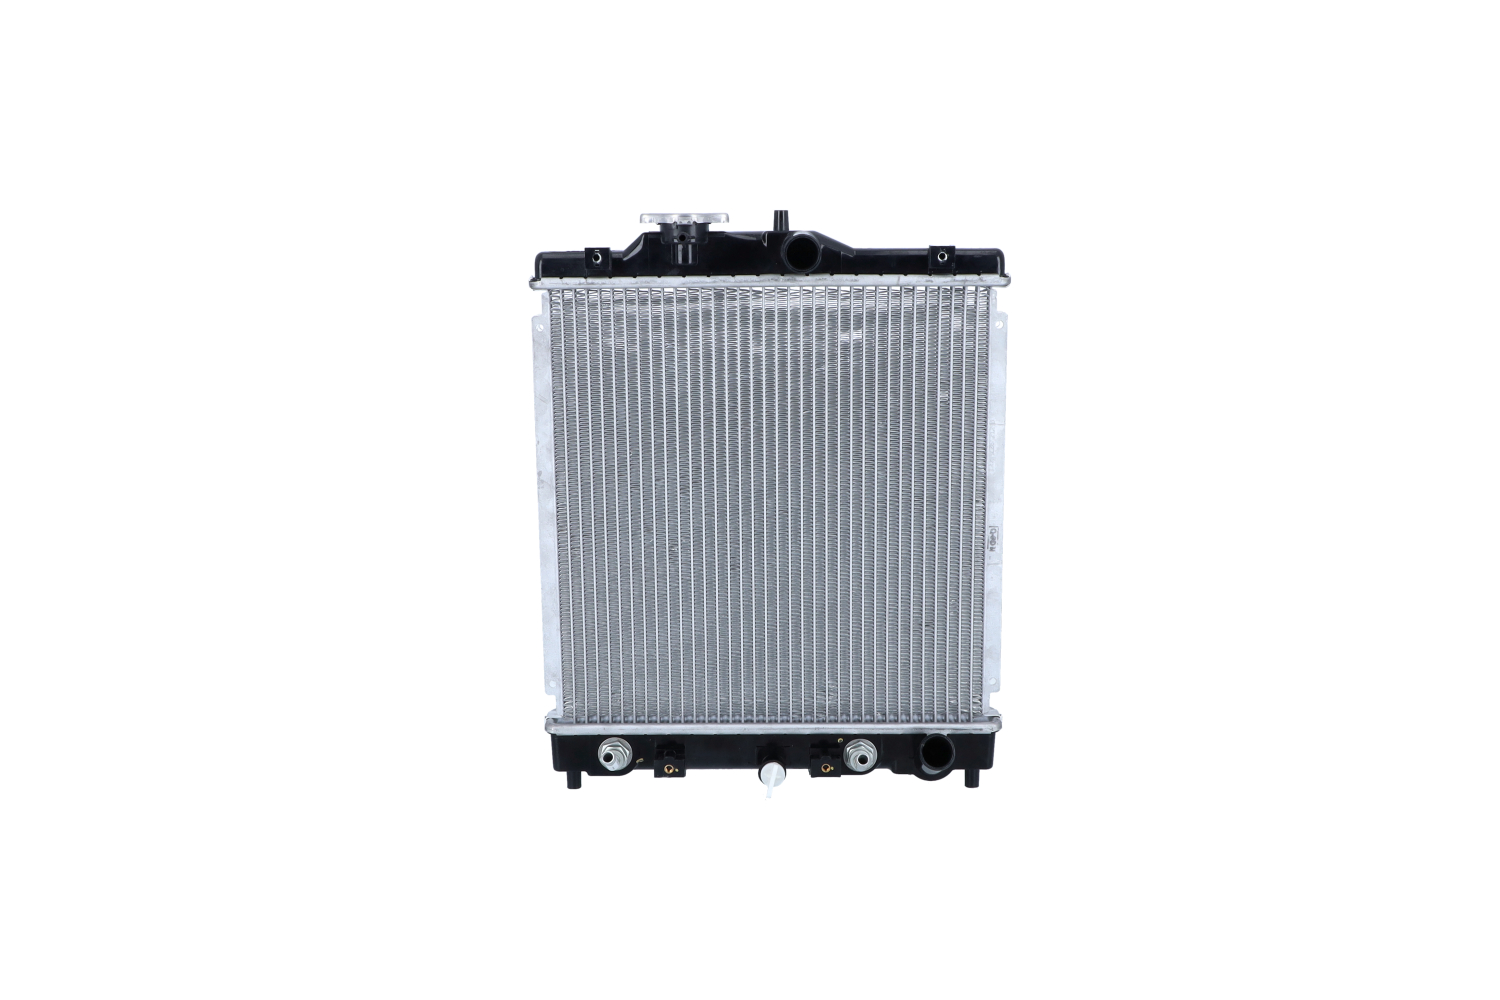 NRF 516355 Engine radiator Aluminium, 352 x 345 x 18 mm, with mounting parts, Brazed cooling fins